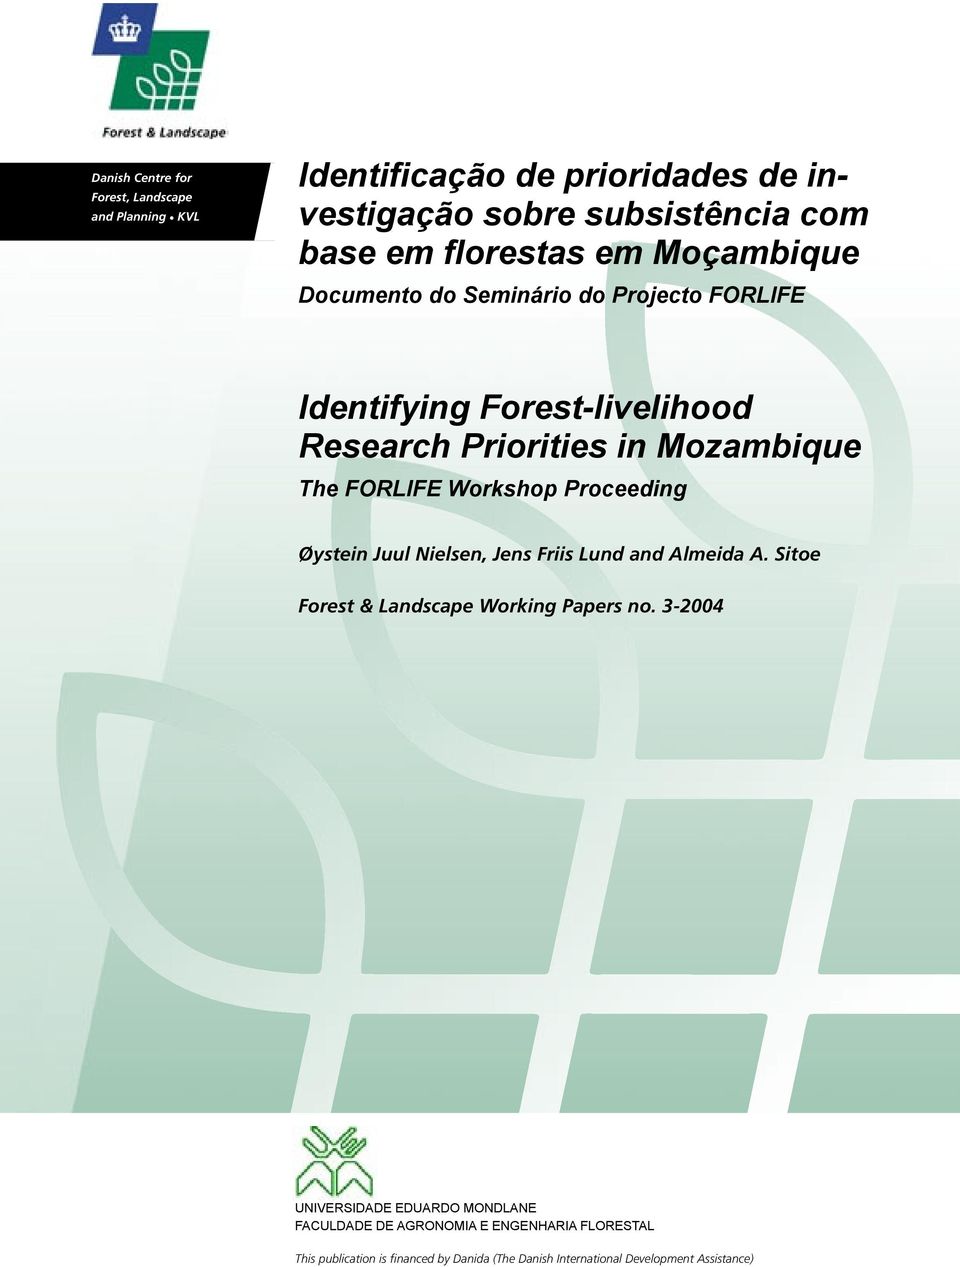 Proceeding Øystein Juul Nielsen, Jens Friis Lund and Almeida A. Sitoe Forest & Landscape Working Papers no.